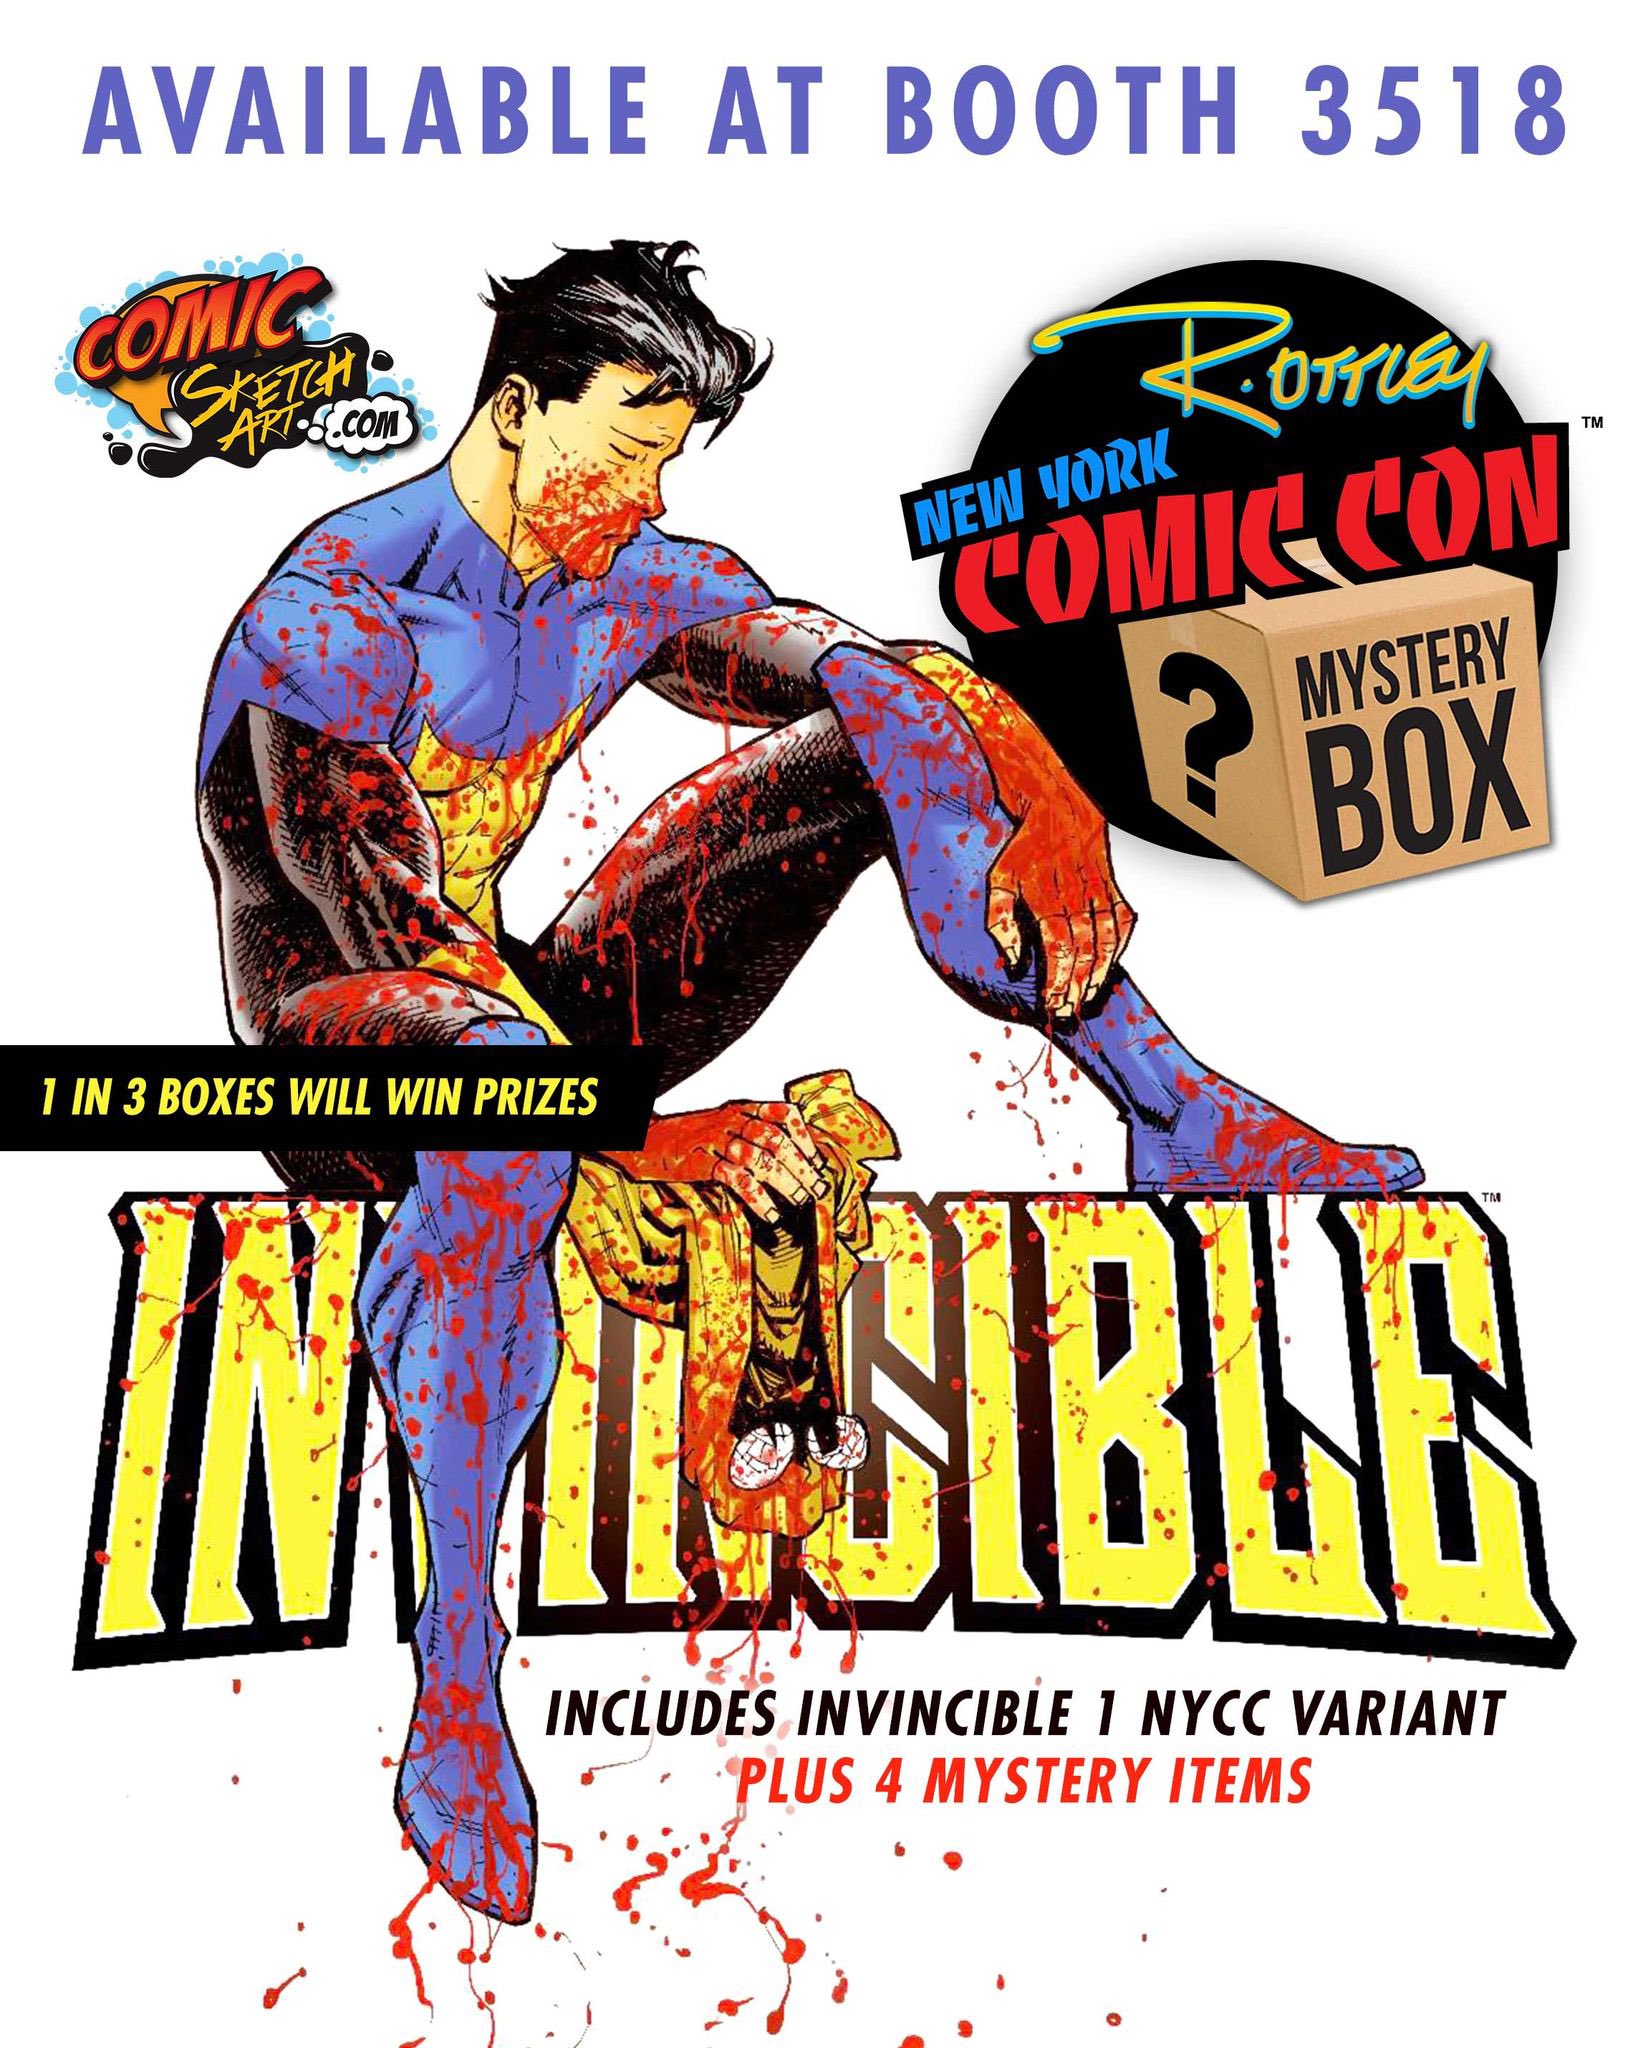 Invincible news: Creator gives another exciting update at NYCC